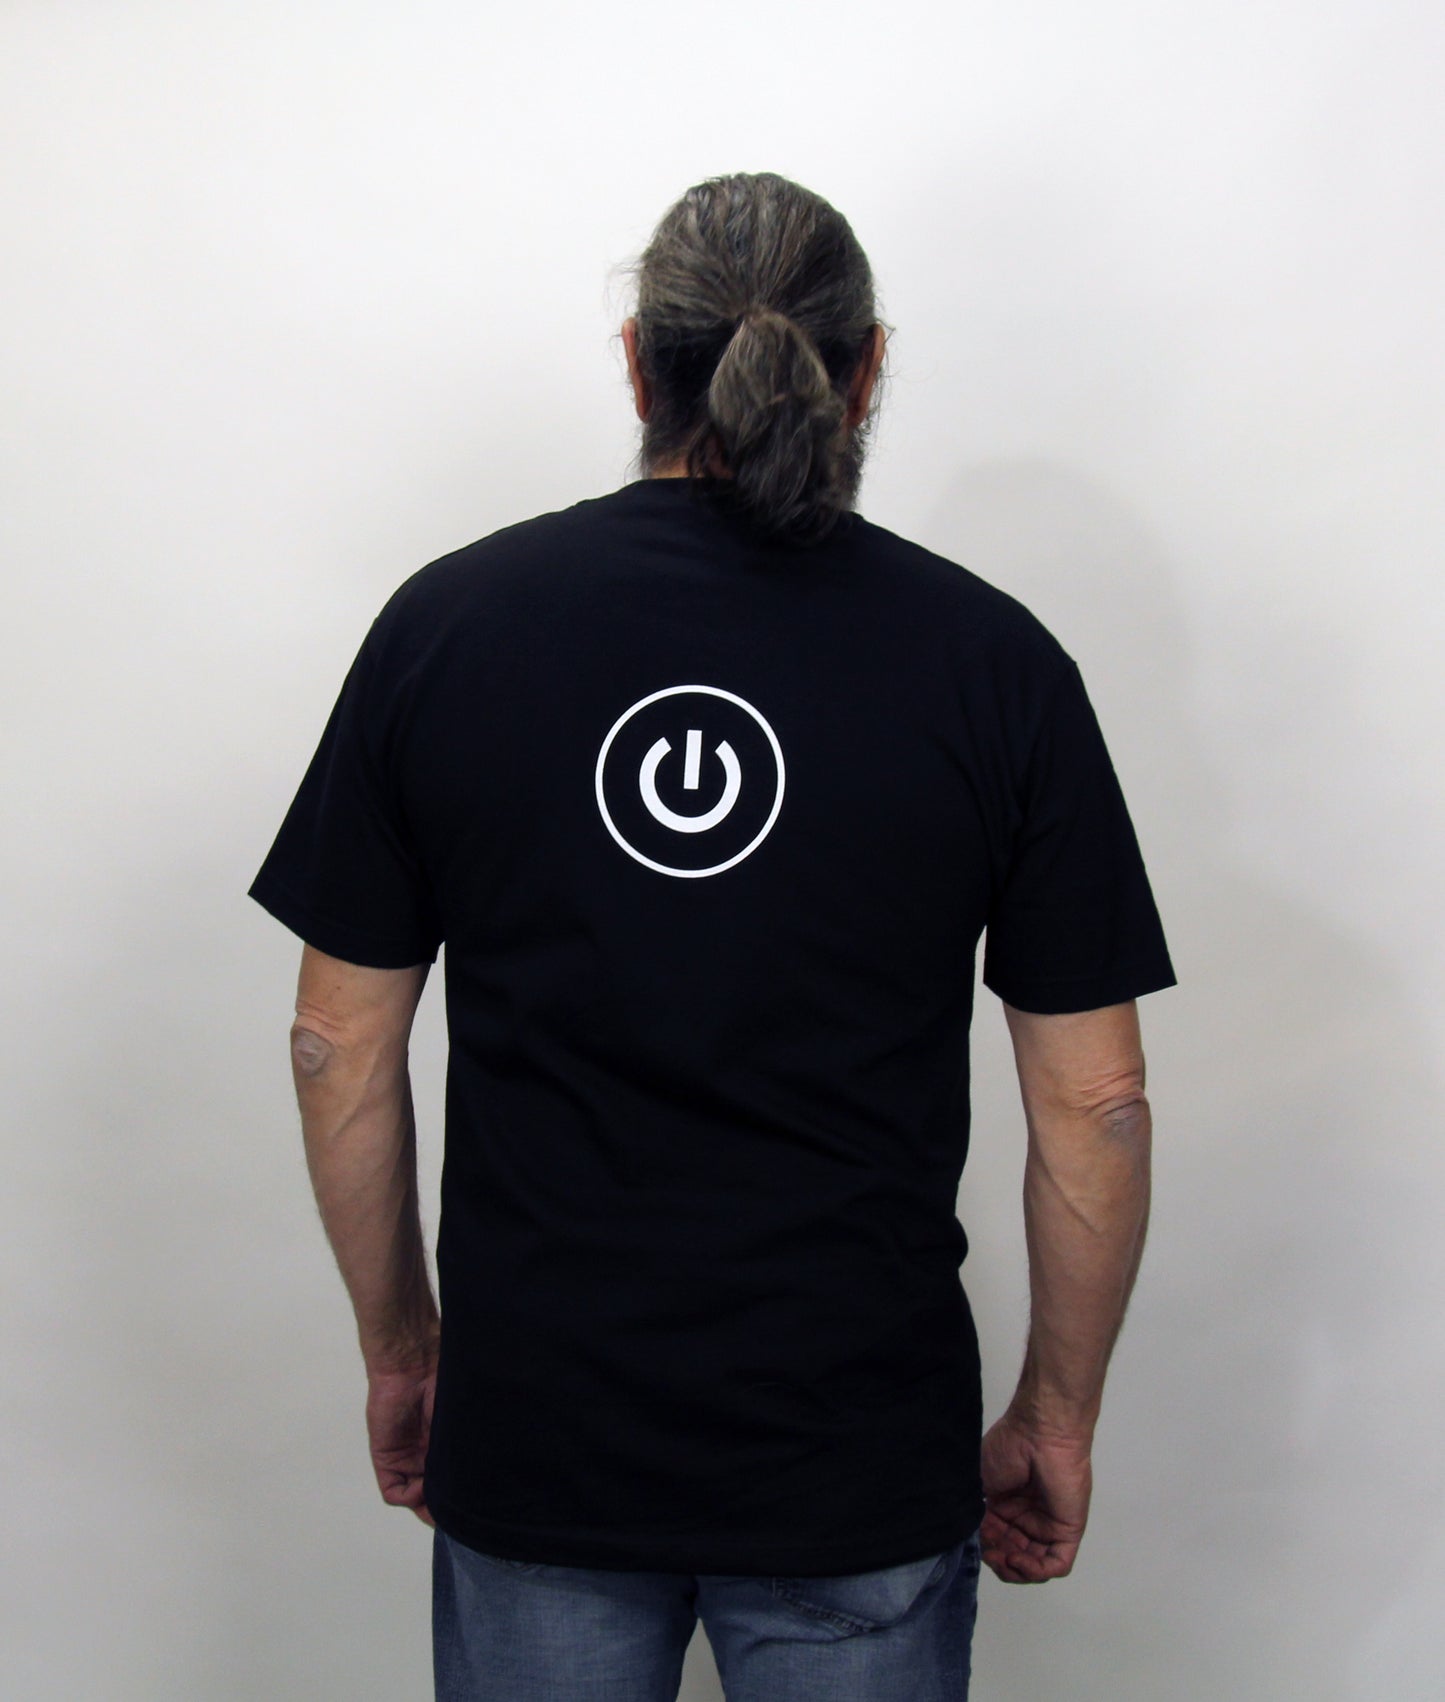 iCrazy, Black Powerup T-Shirt (Mens and Ladies cuts)